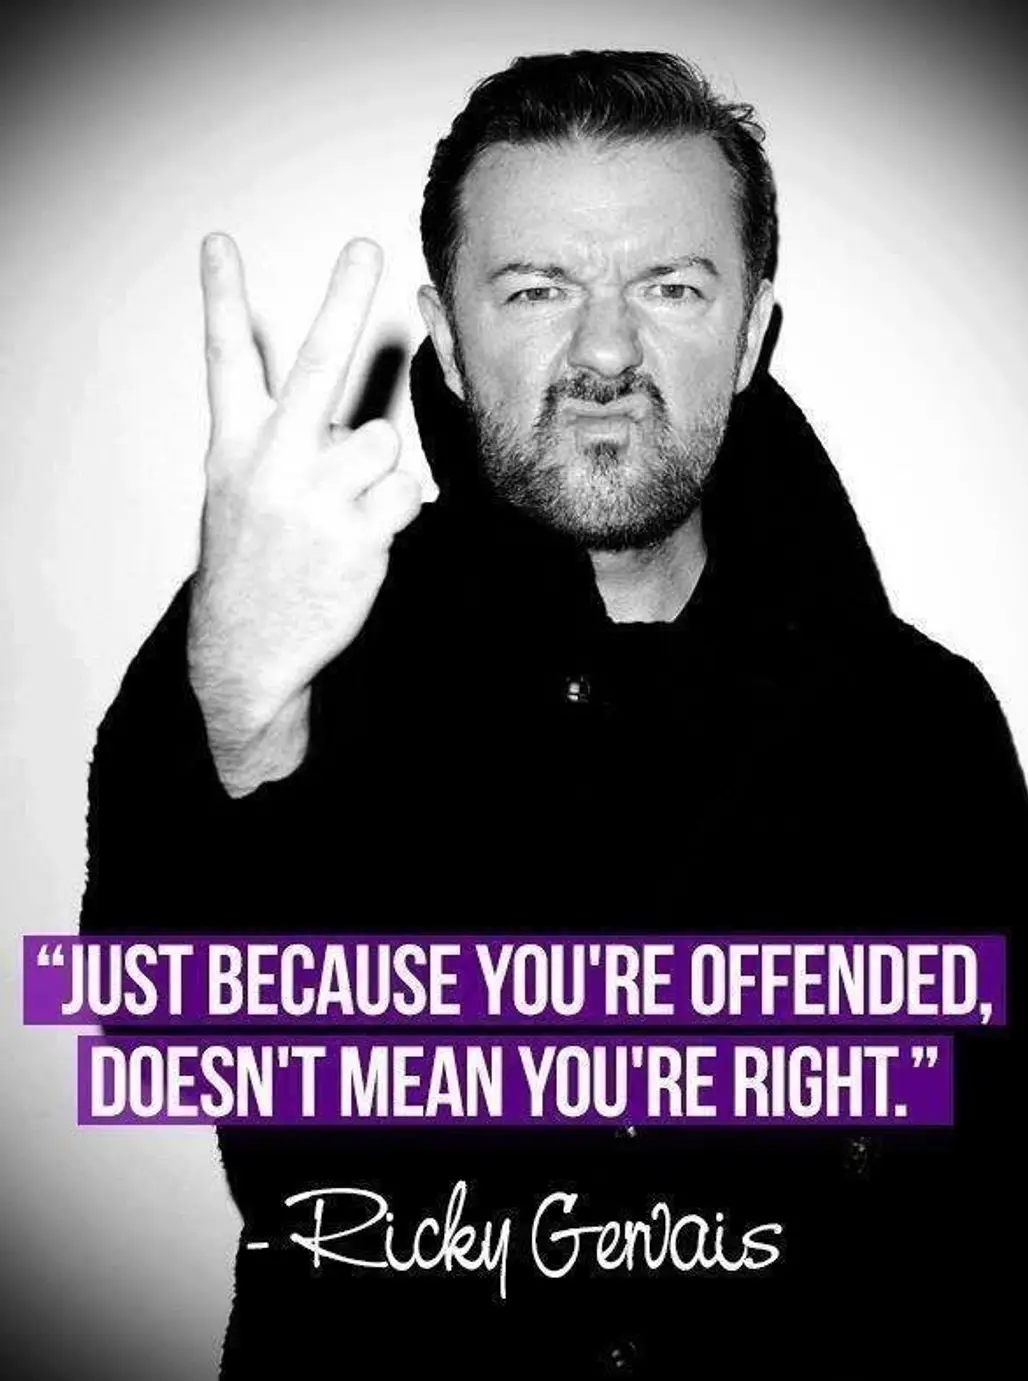 For People Who Get Offended Easily